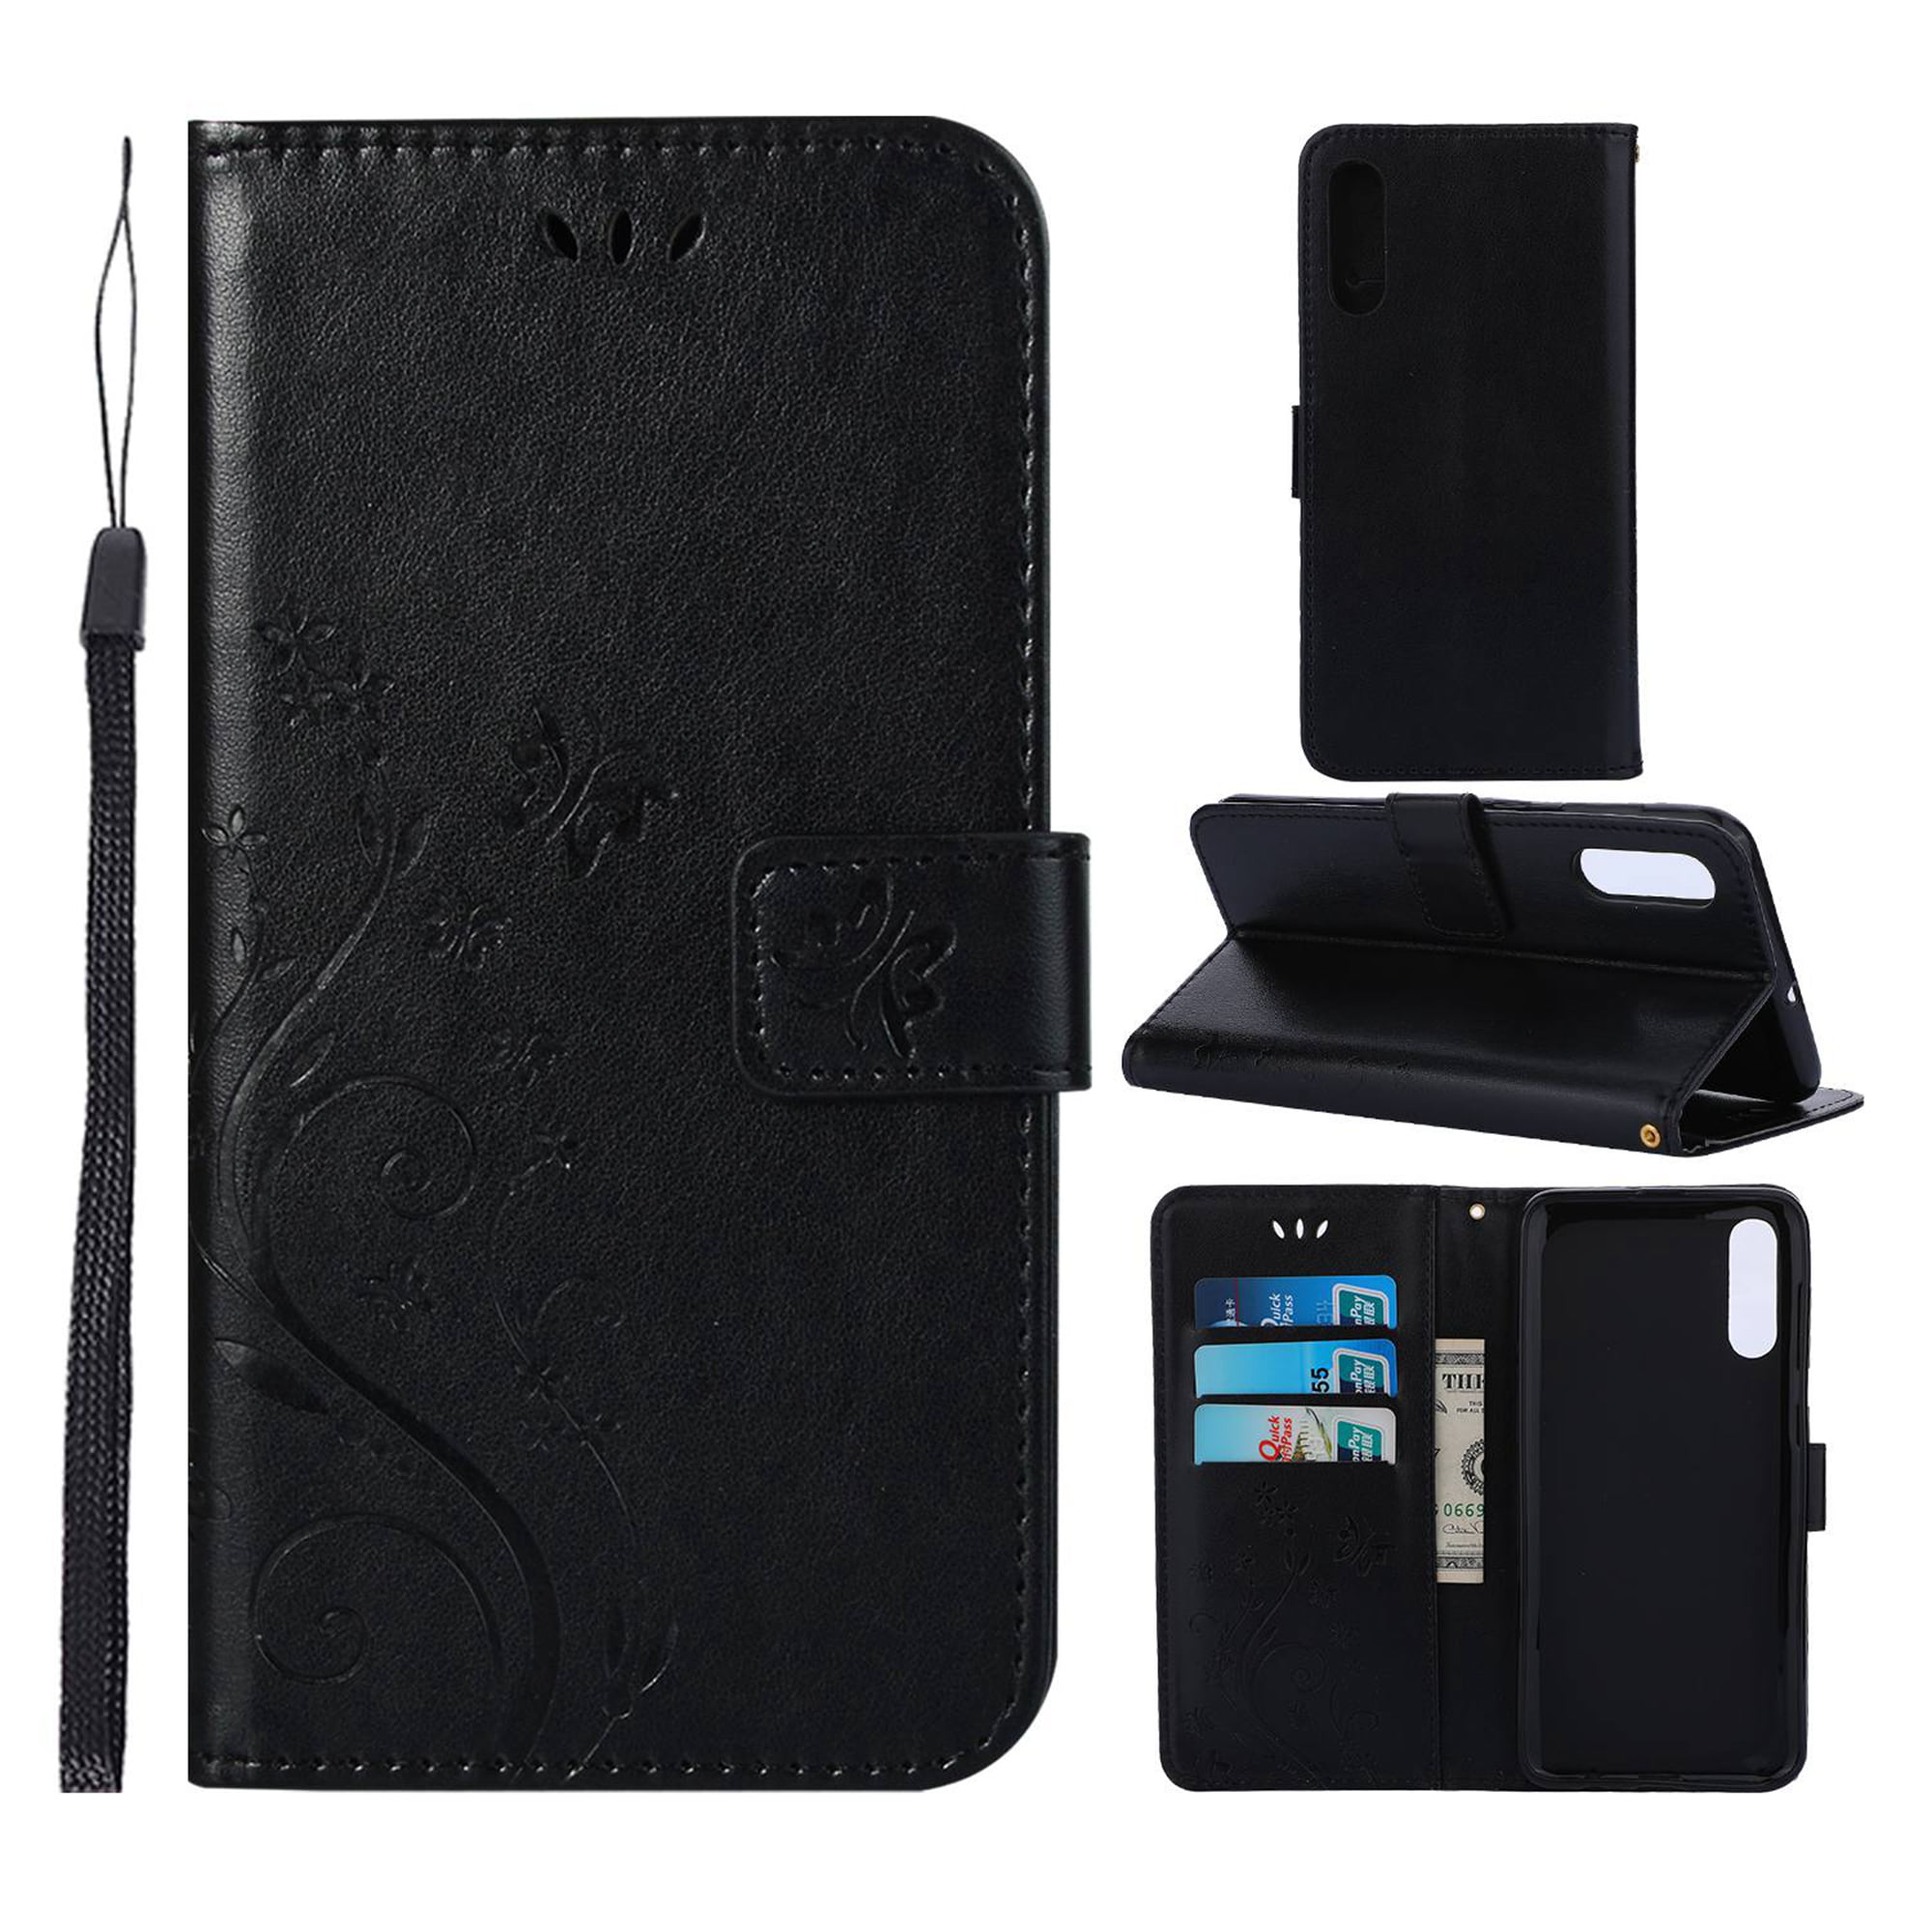 Stylish Flip Wallet Case for Samsung Galaxy A50,Lace Pattern PU Leather Case for Samsung Galaxy A50,Moiky Black Lace Hollow Case with Wrist Strap Shockproof Magnetic Closure Protection